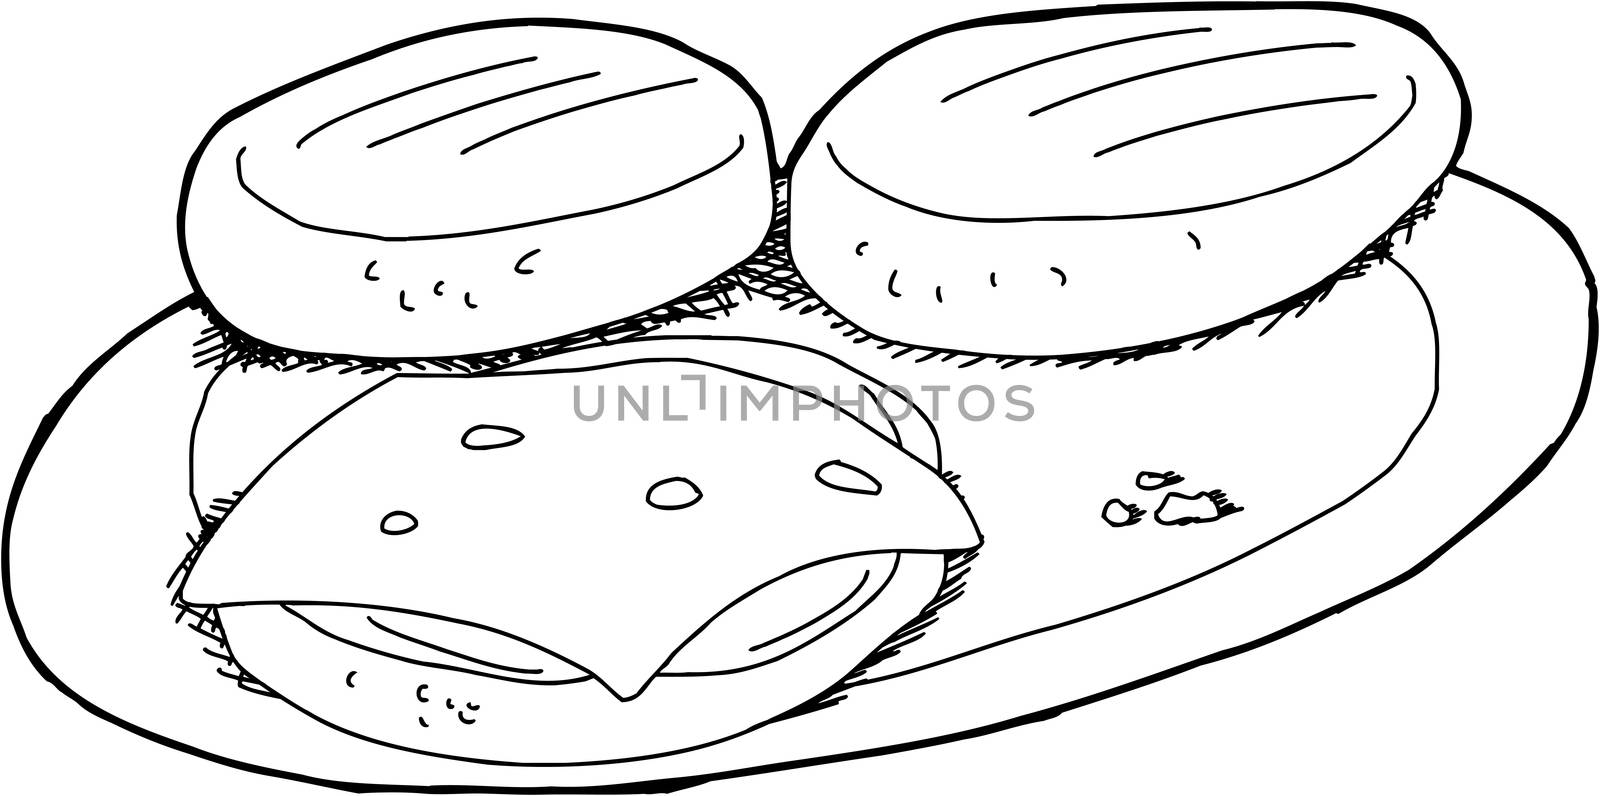 Outlined Burgers on Plate by TheBlackRhino